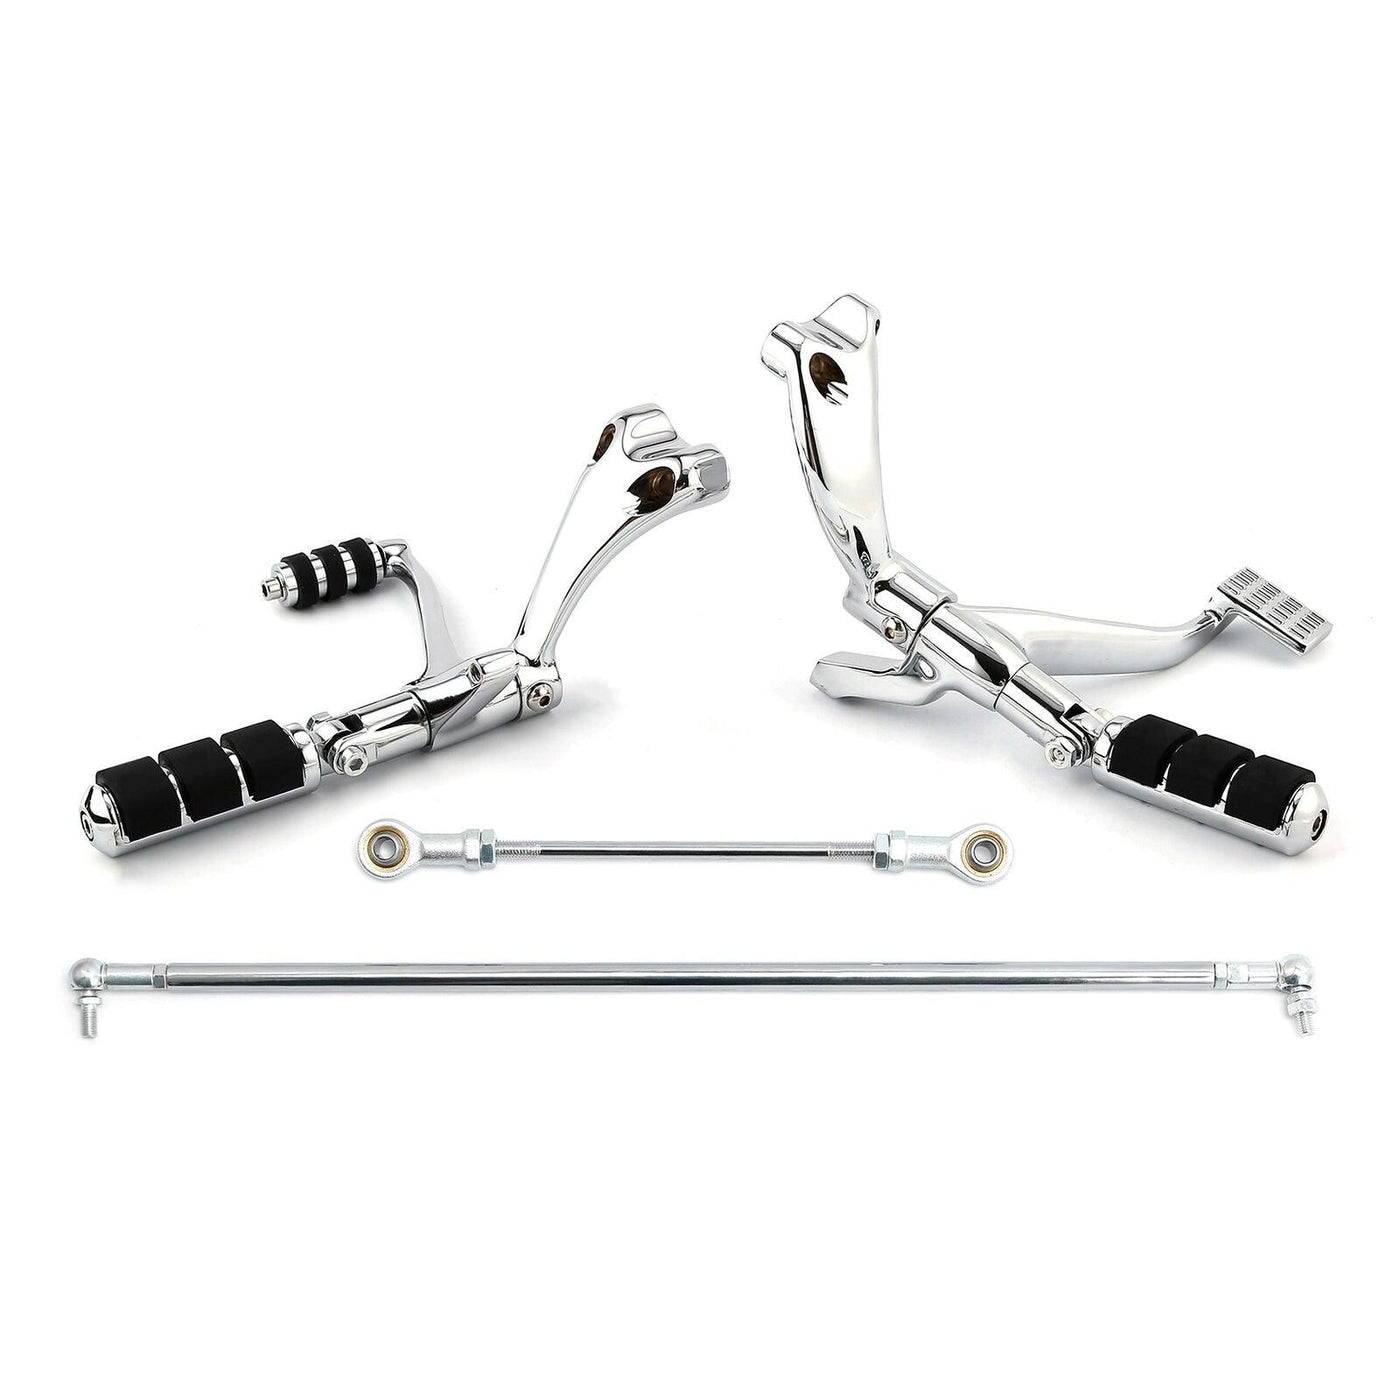 Forward Controls Pegs Levers Linkages Fit For Harley Sportster 1200 Custom 04-13 - Moto Life Products